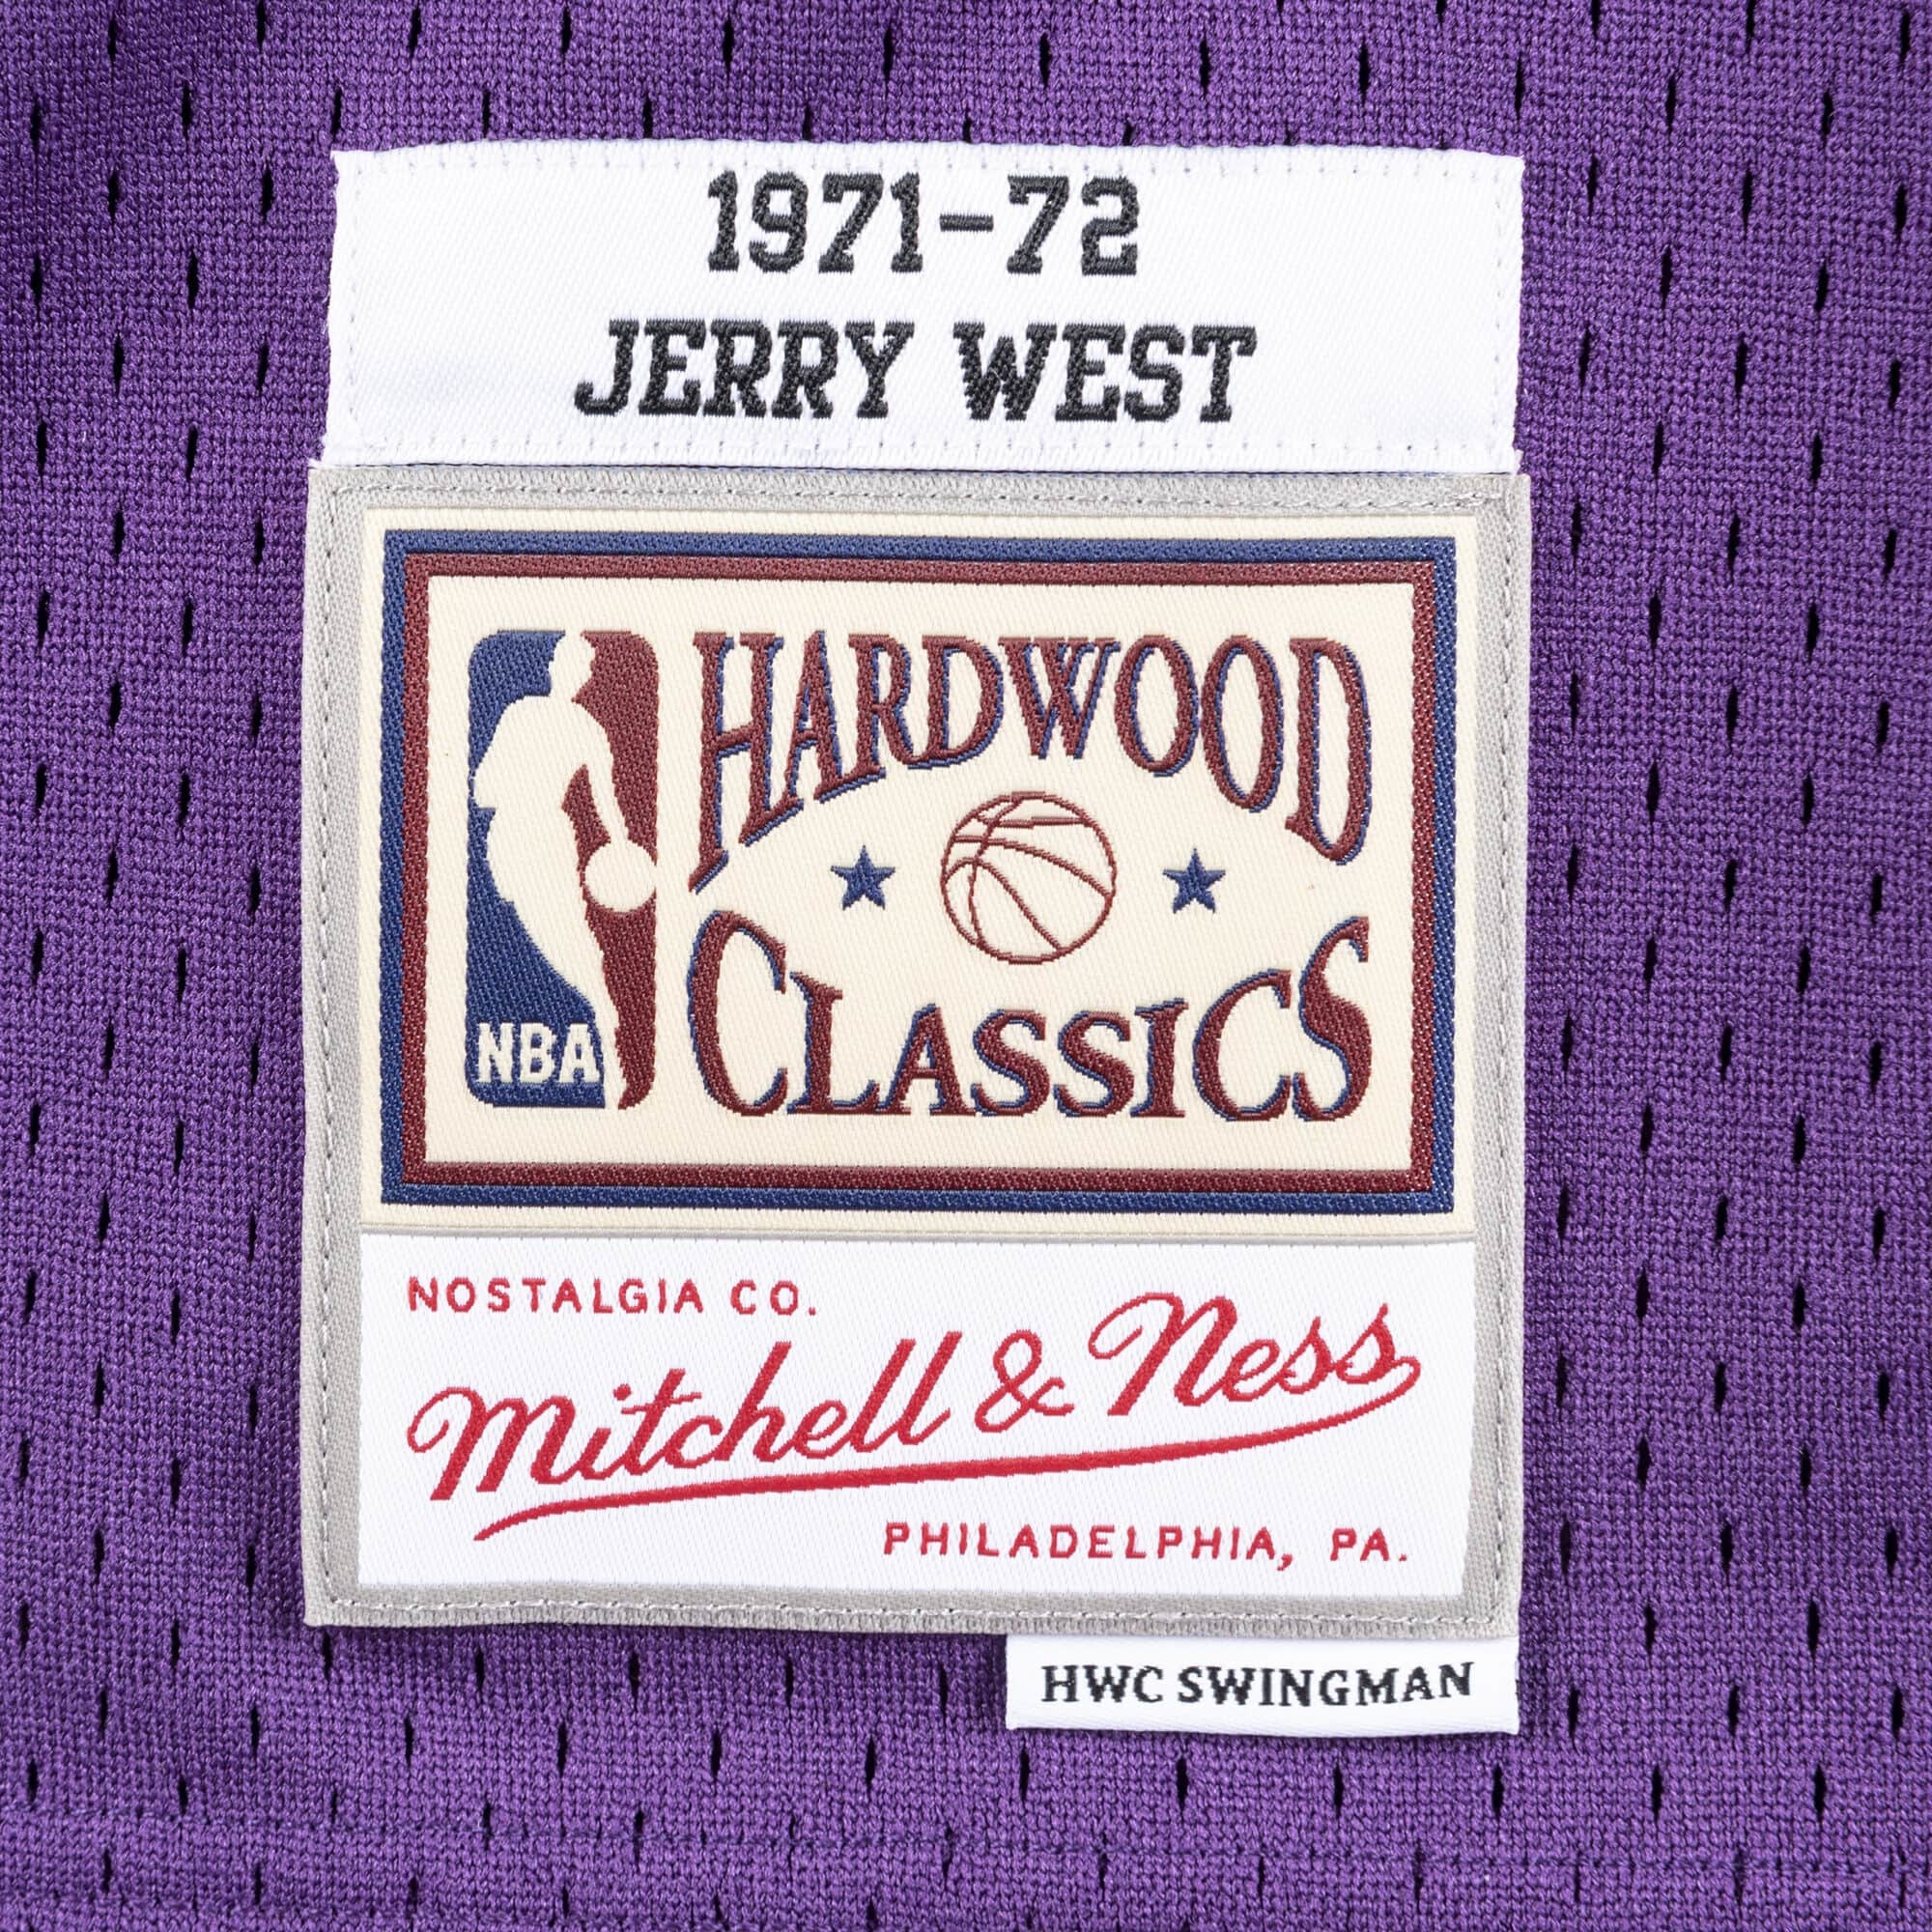 Fanatics Authentic Jerry West Gold Los Angeles Lakers Autographed 1971-72 Mitchell & Ness Hardwood Classics Replica Jersey with HOF 1980+2010 Inscription